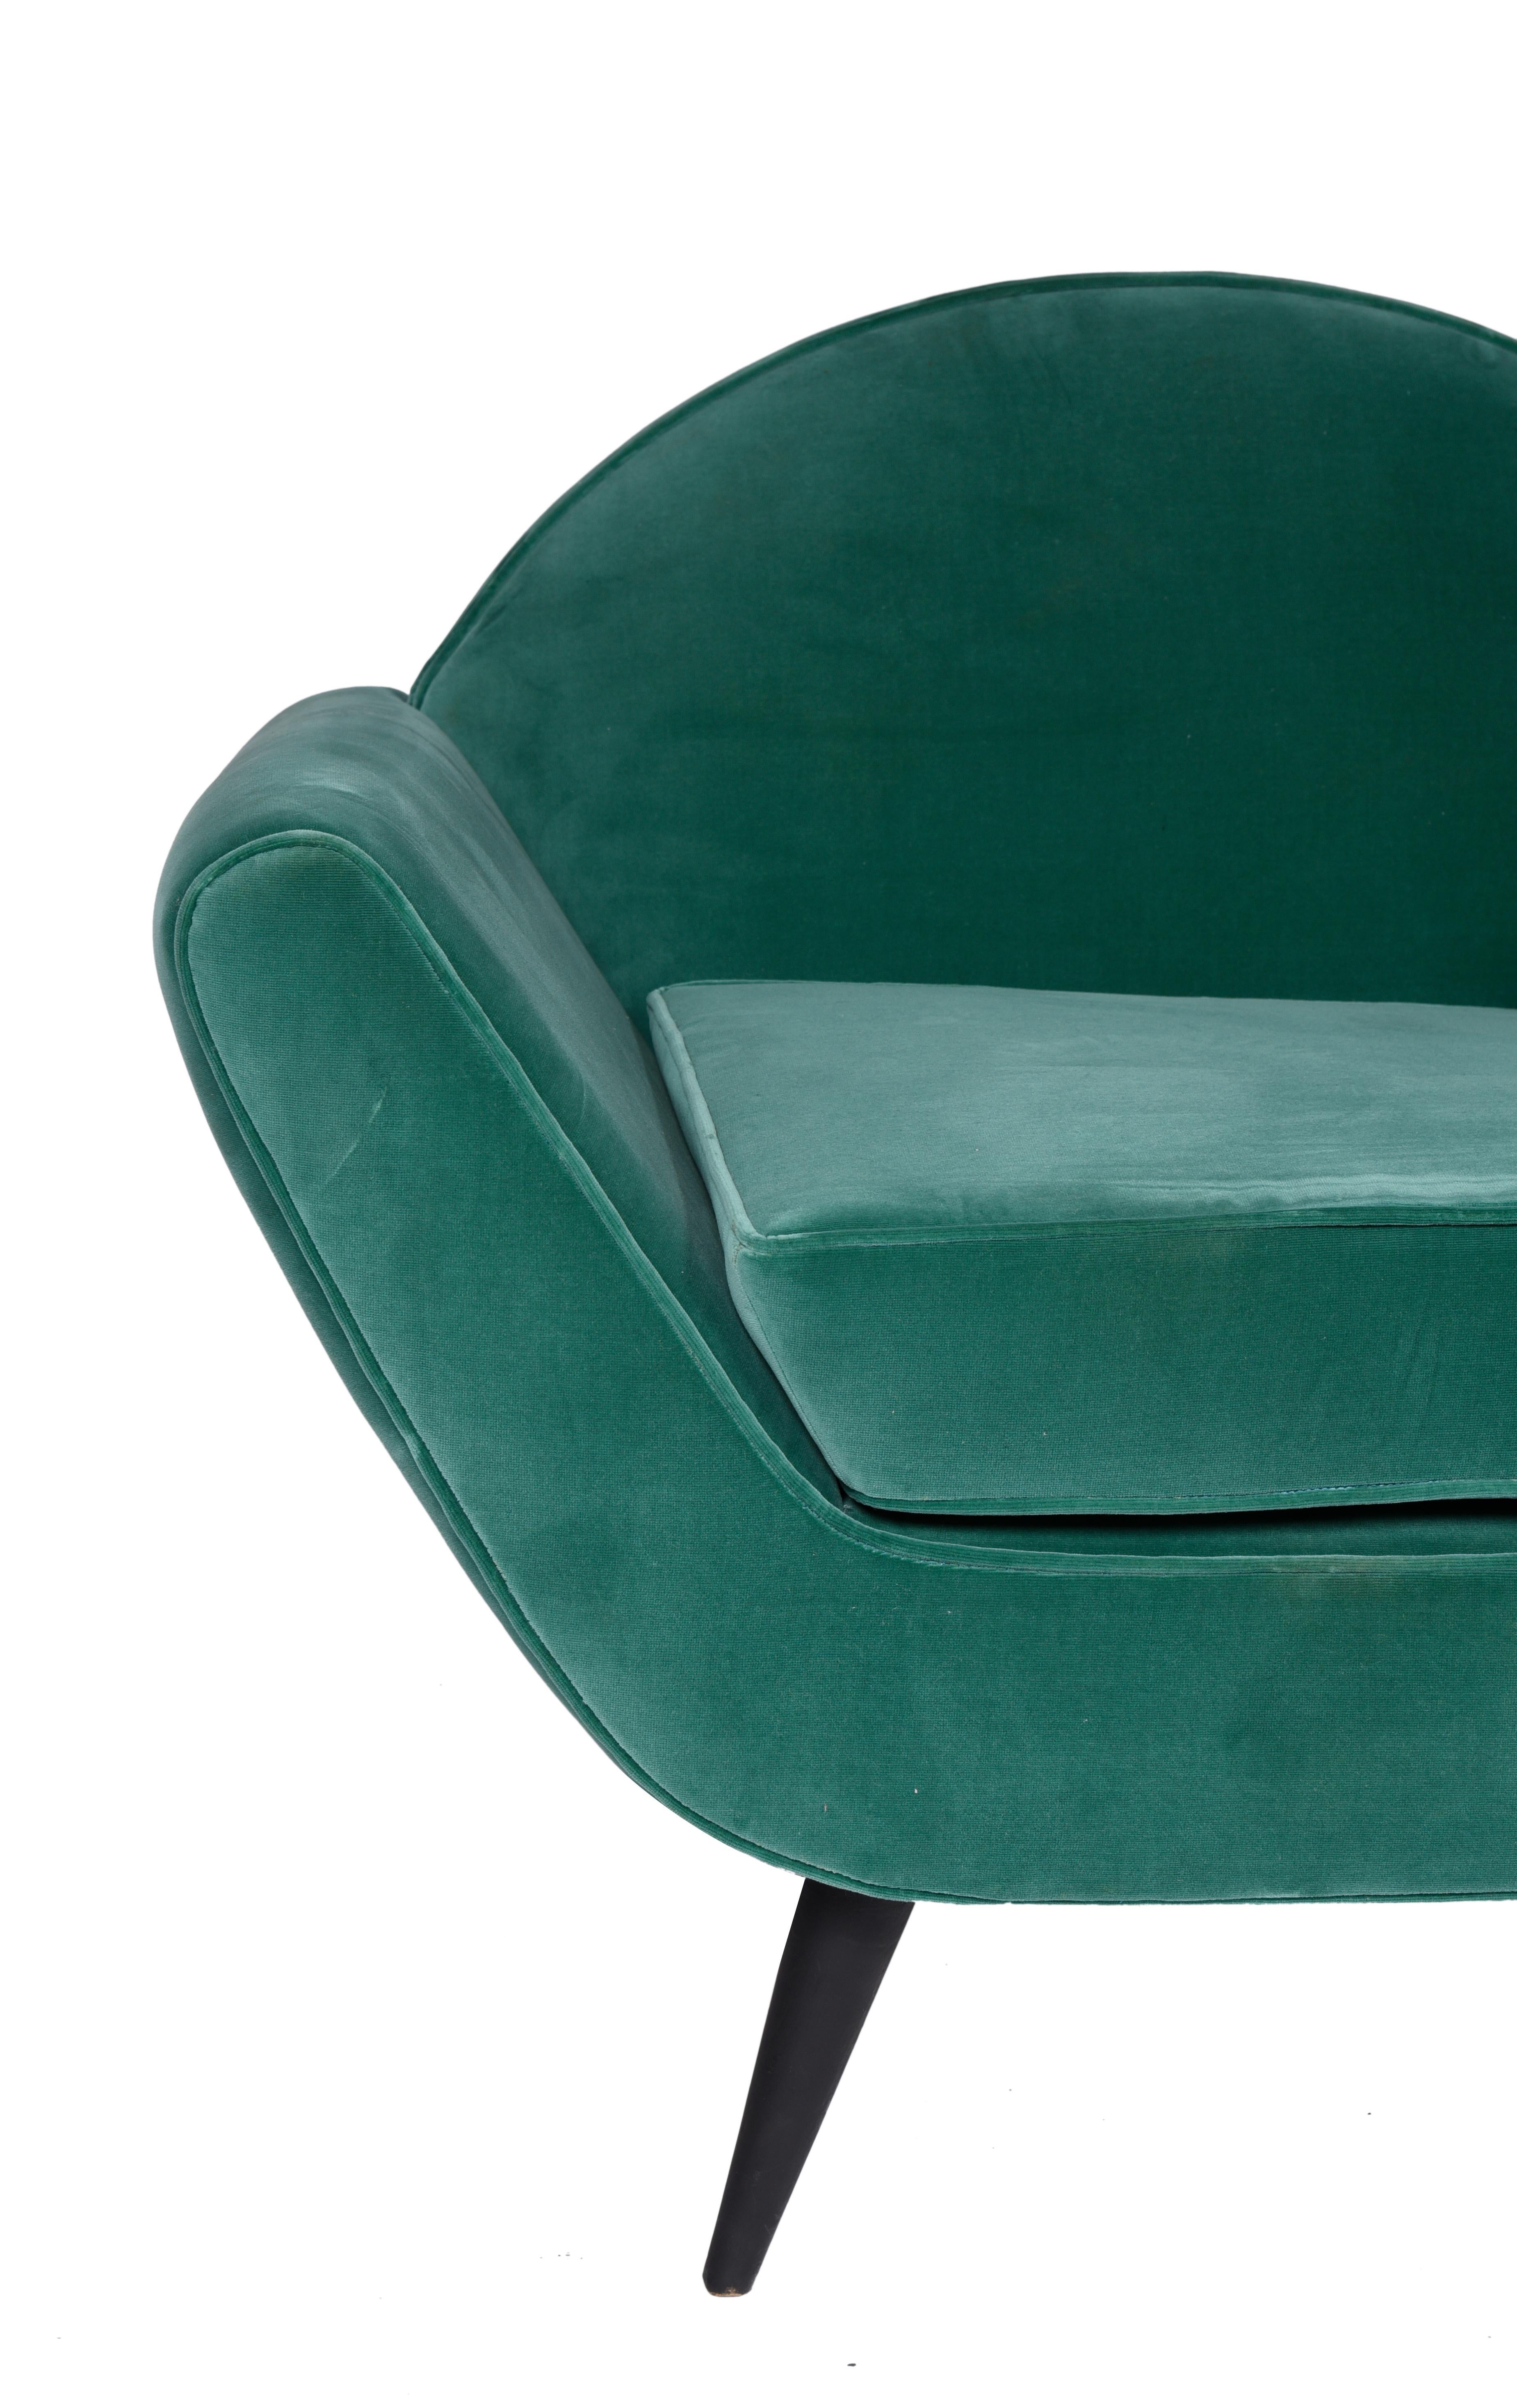 Rapizzardi Midcentury Brazilian Armchair in Velvet and Wood, 1950s

Armchair with green velvet upholstery designed by G. Rapizzard in the mid-1950s, a designer still unknown in the Brazilian market.
Its wide structure and its art deco style design